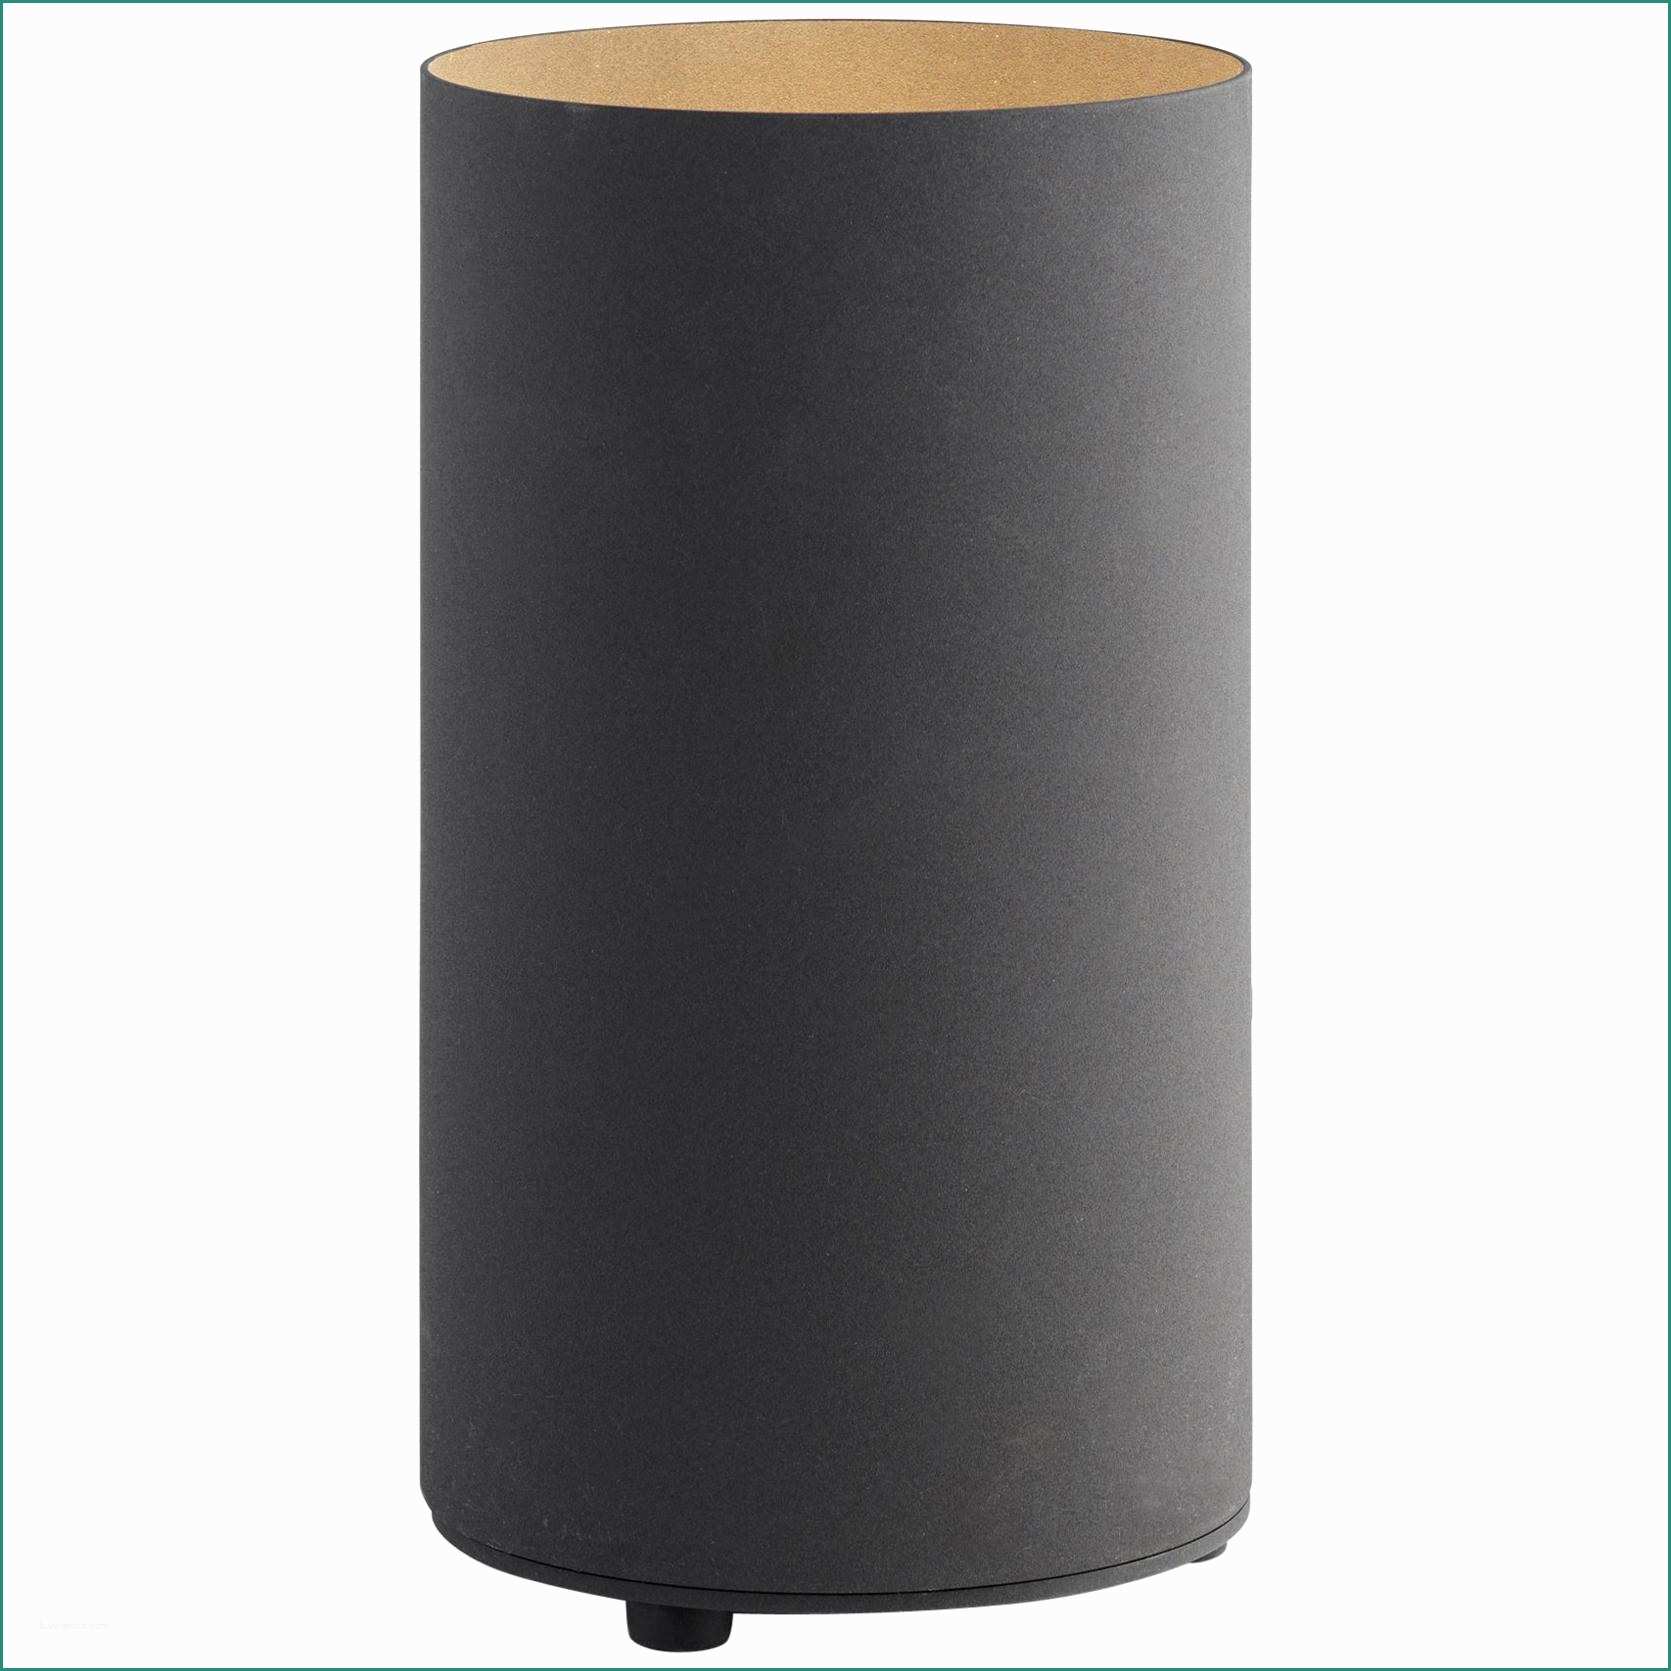 Arco Di Flos E Tekna Floor Od Led Floor Lamp In Black with Gold Colored Interior